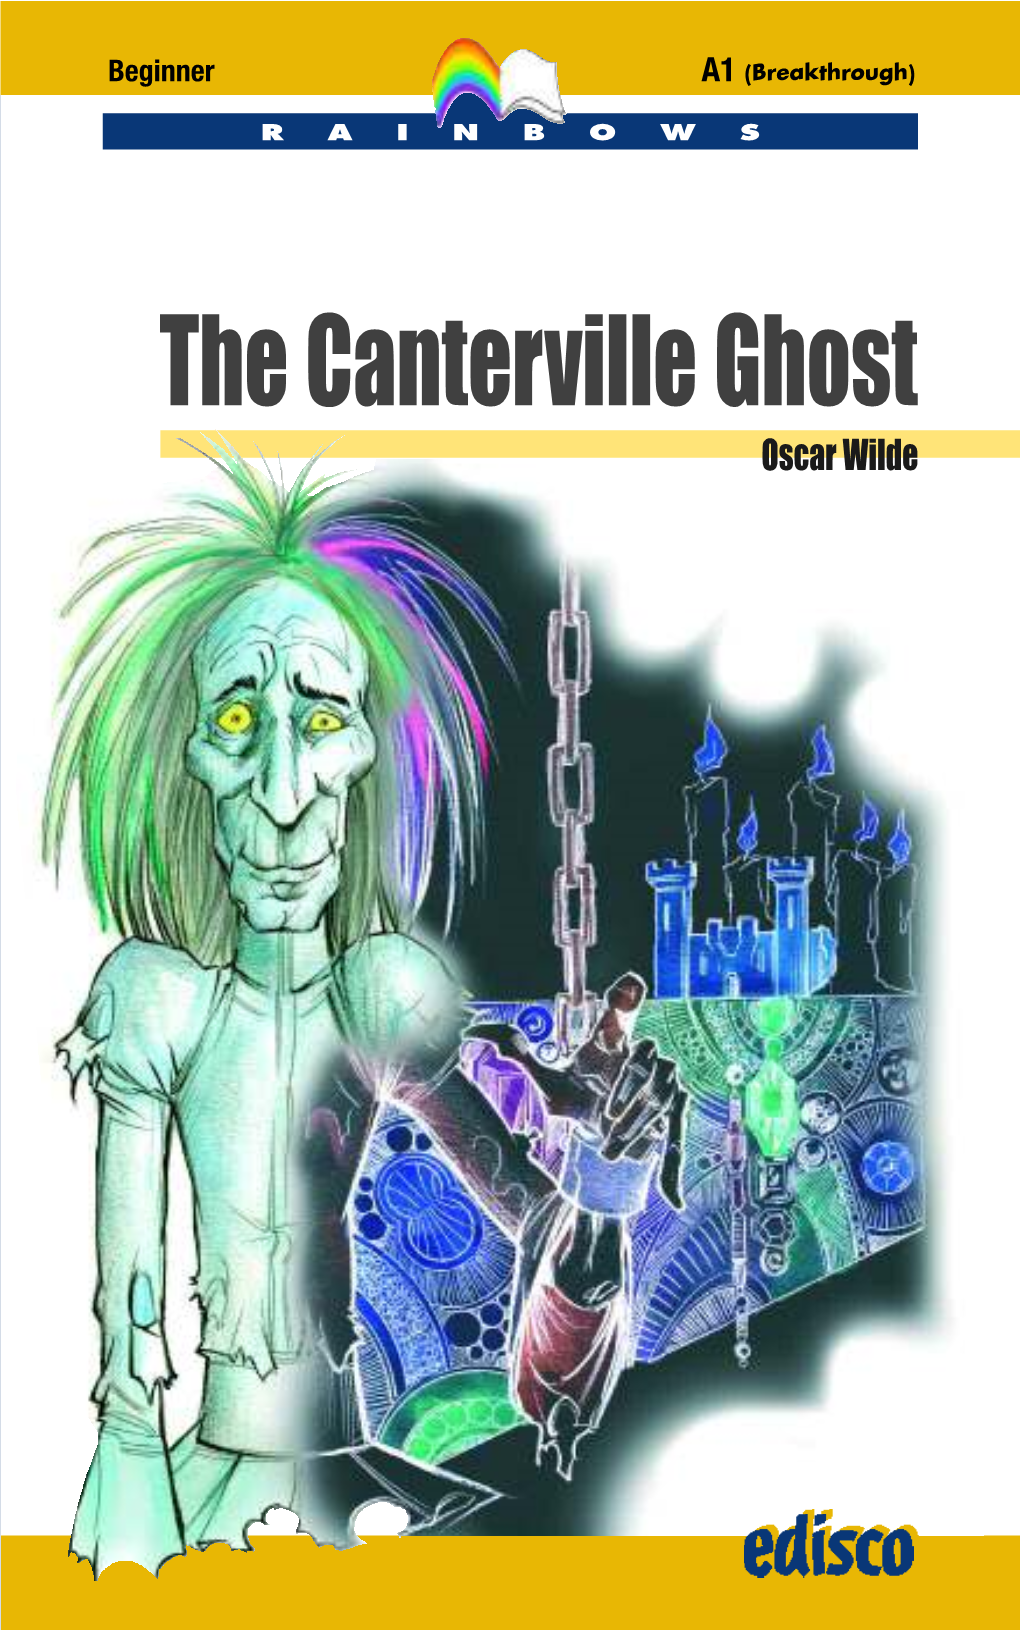 The Canterville Ghost Oscar Wilde H Atril Ghost Canterville the R a I N B O W S